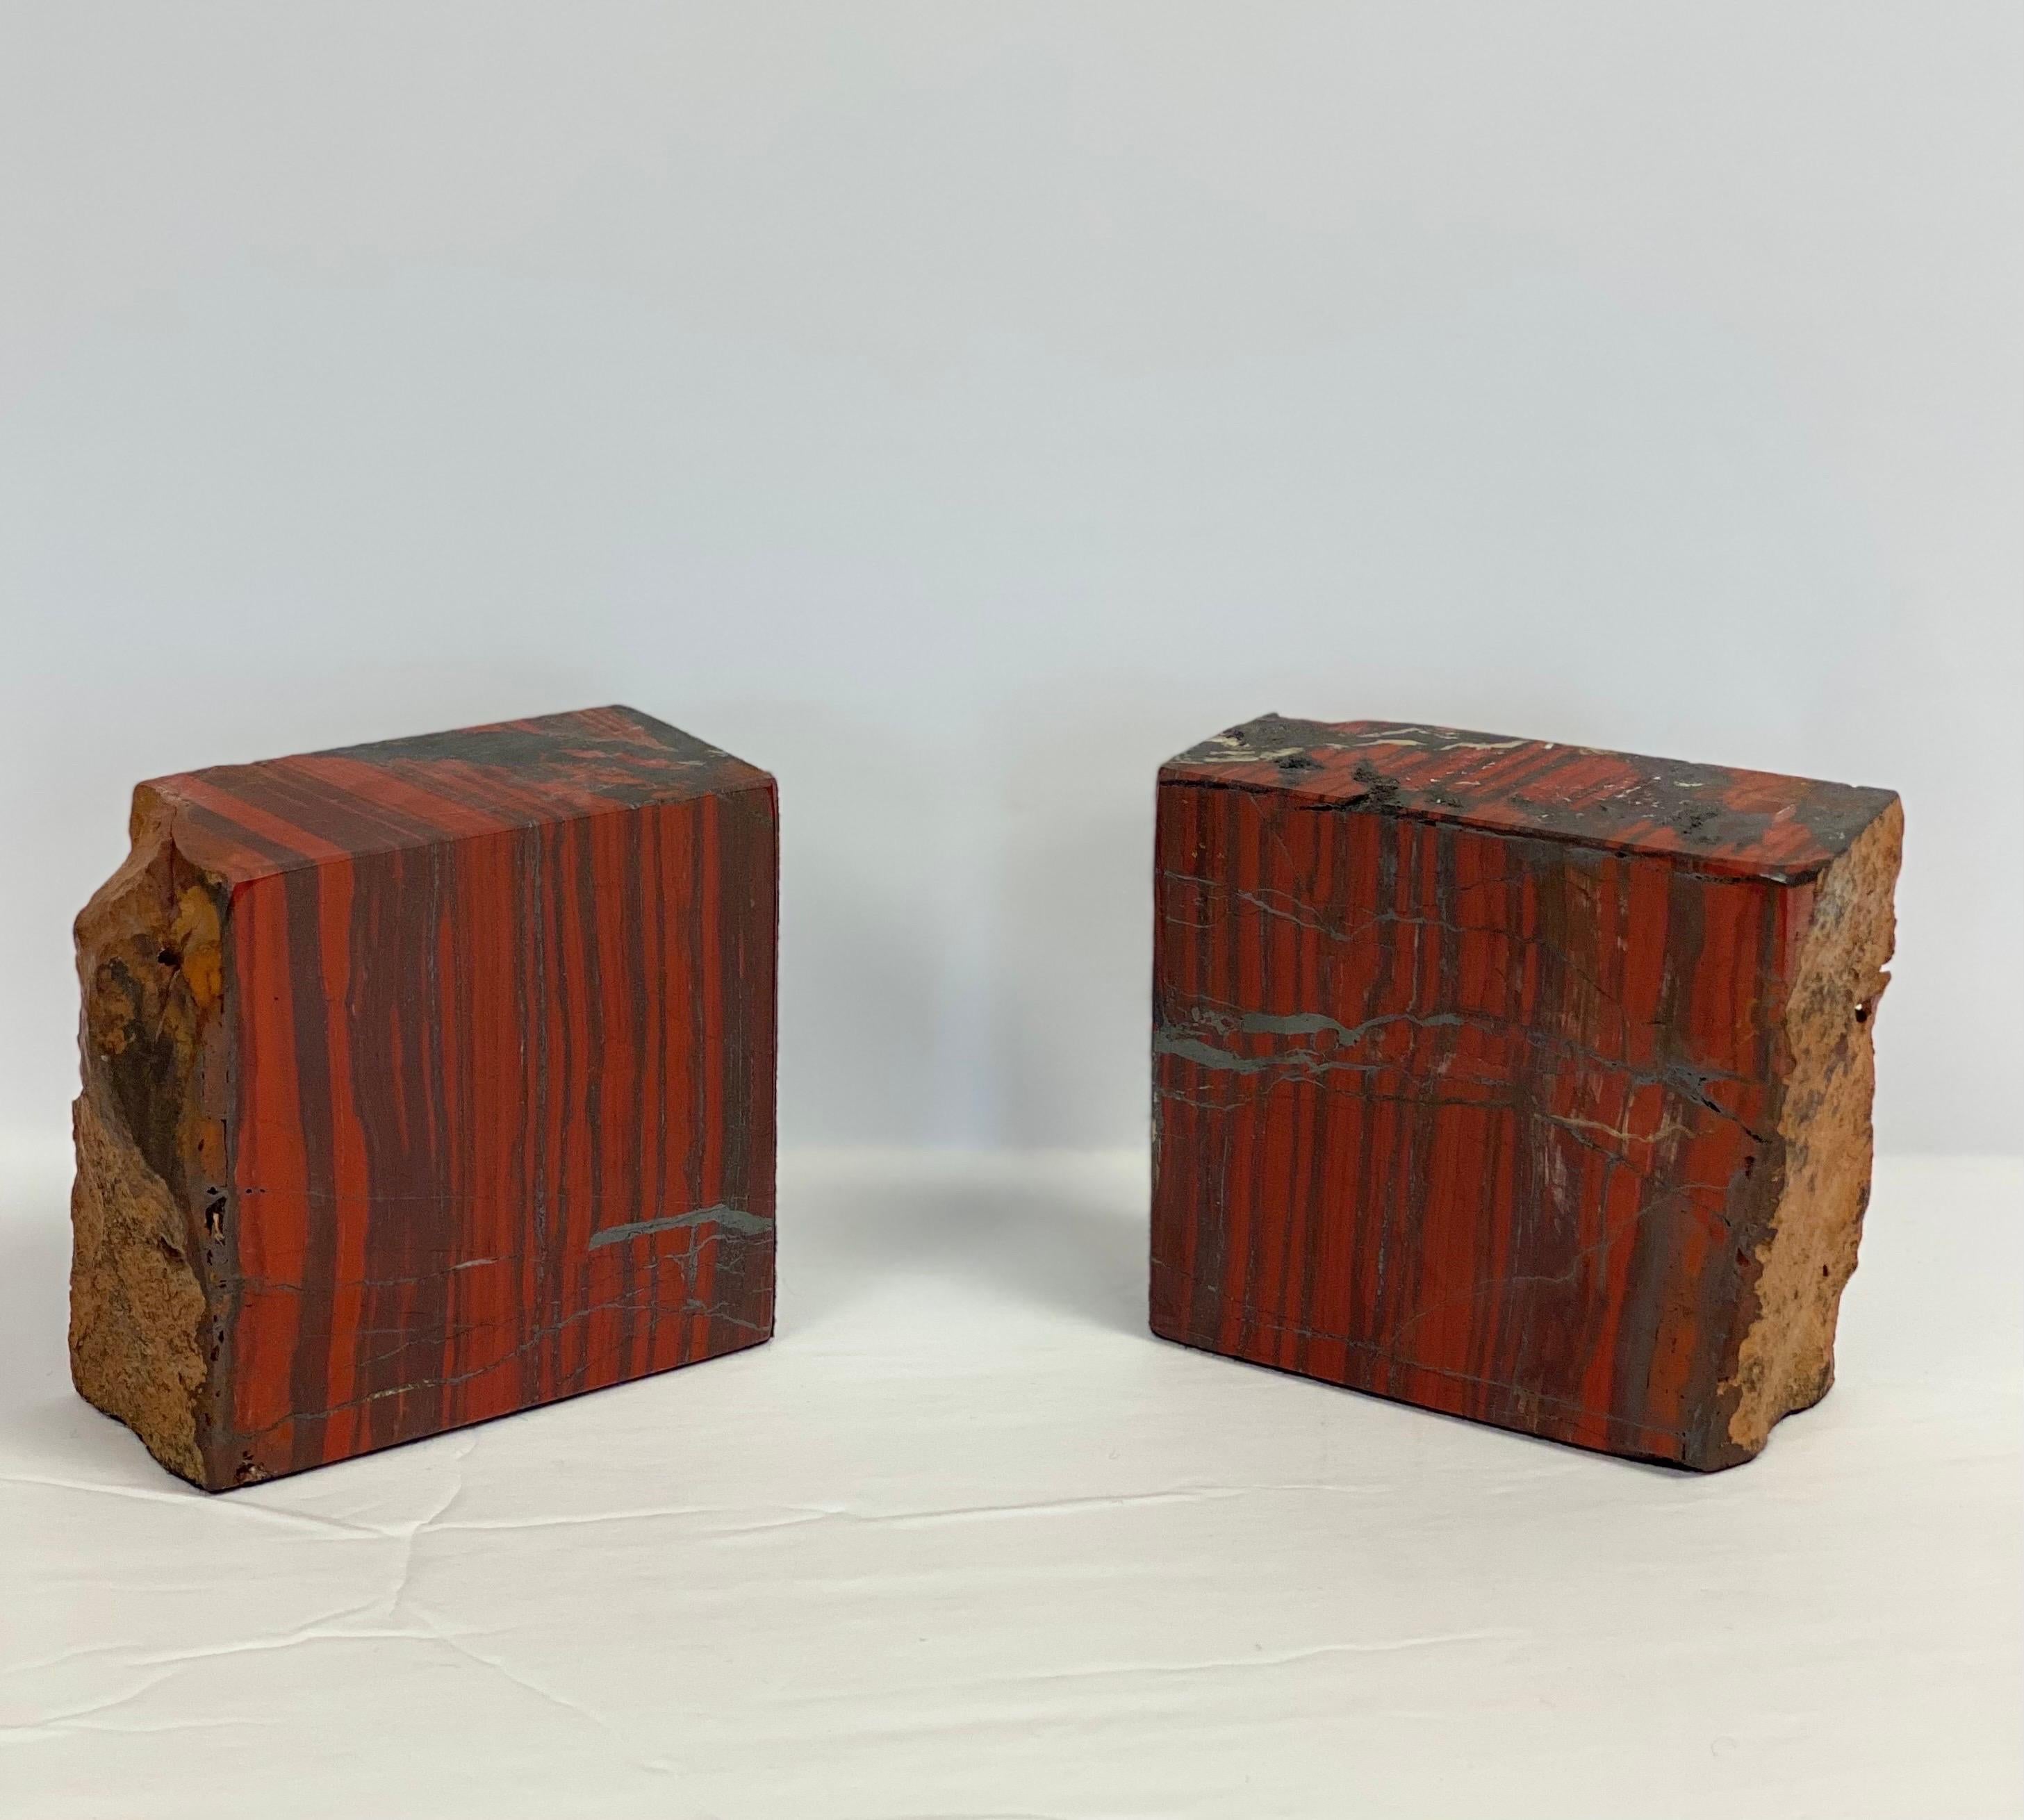 We are very pleased to offer a unique pair of heavy-weight, petrified wood bookends, circa the 1960s. Petrified wood is the name given to wood that has been turned into stone (fossilized) through the process of permineralization. This type of